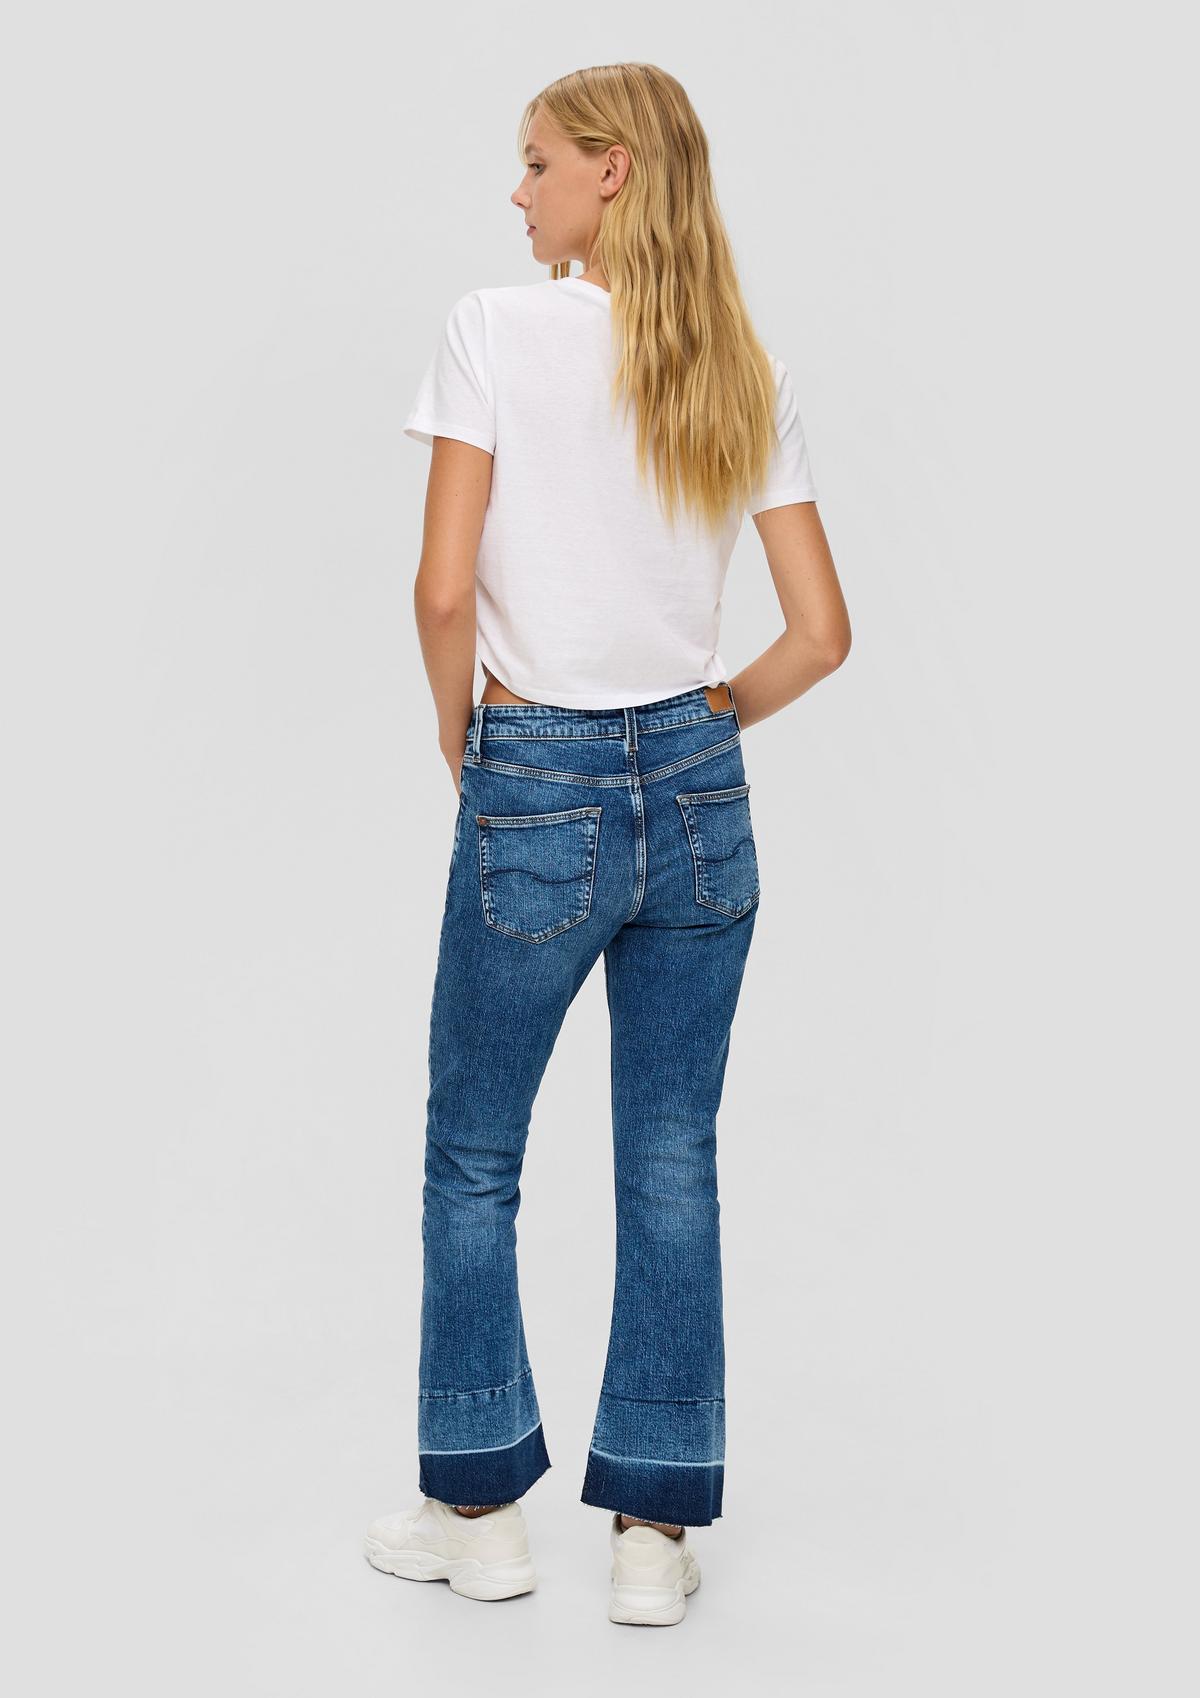 s.Oliver Reena cropped jeans / Slim fit / High rise / Flared leg